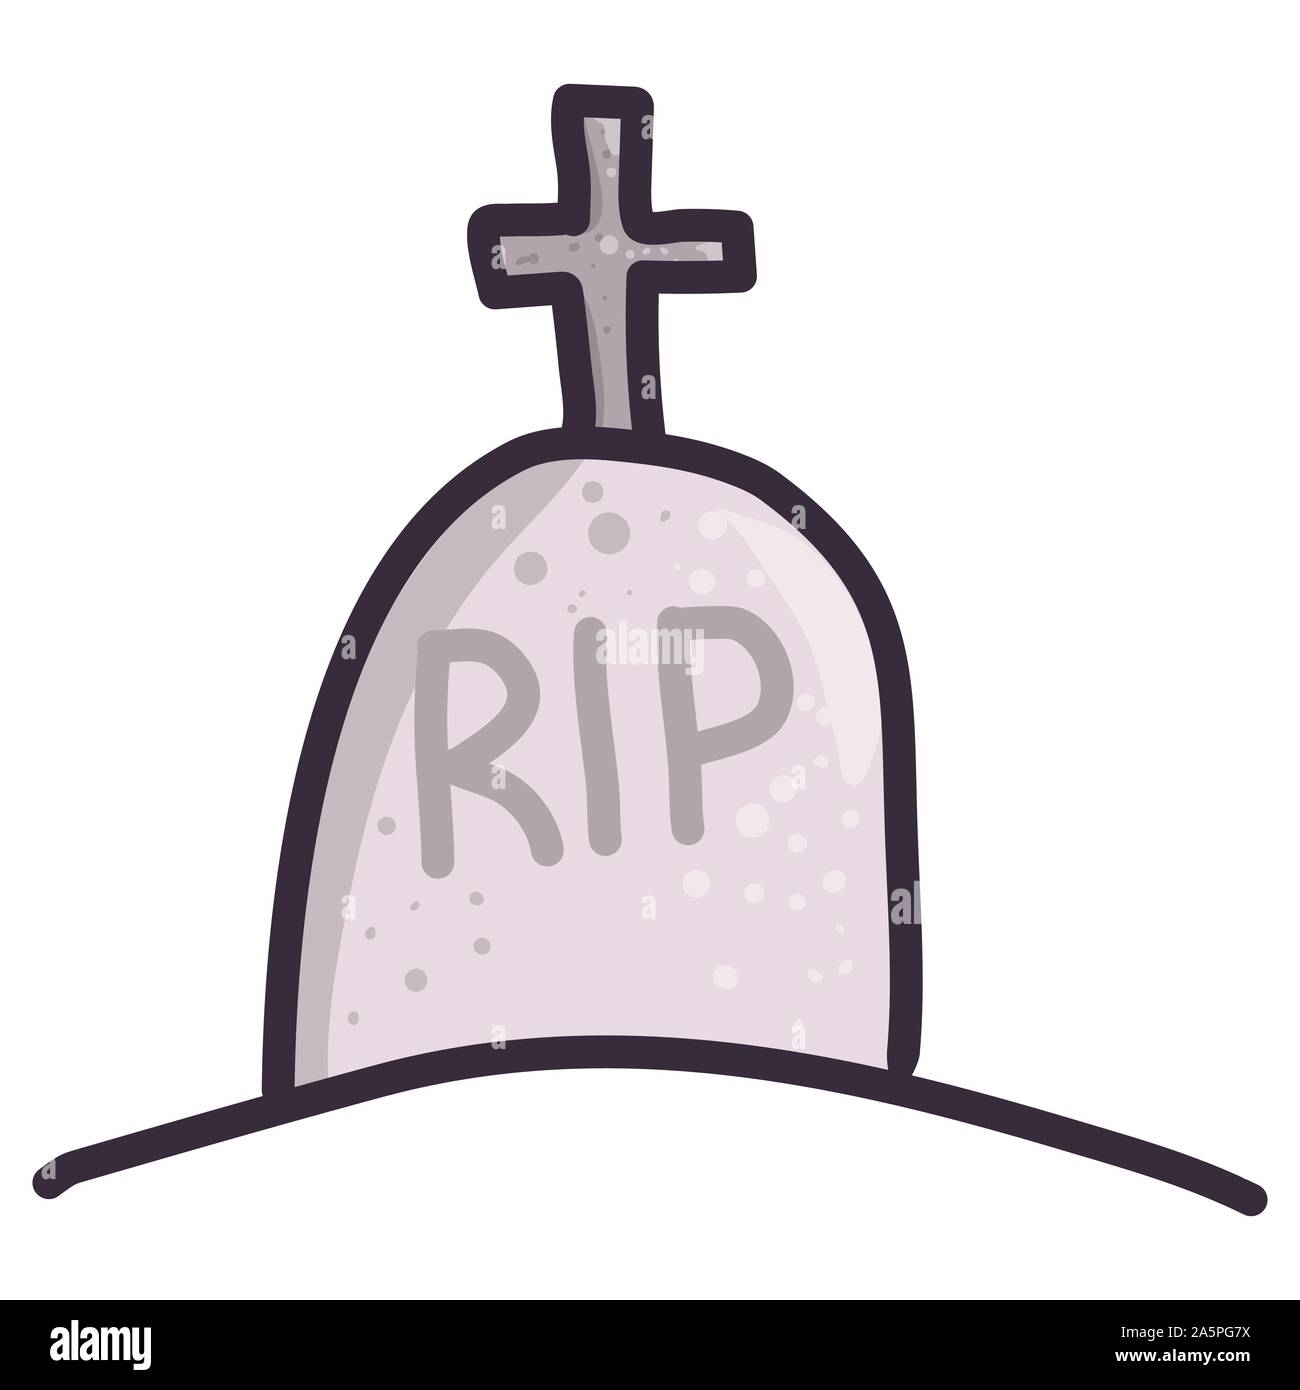 Cartoon illustration with rip gravestone with cross on white background. Flat vector icon. Scary halloween art. Tombstone cemetery isolated. Stock Vector